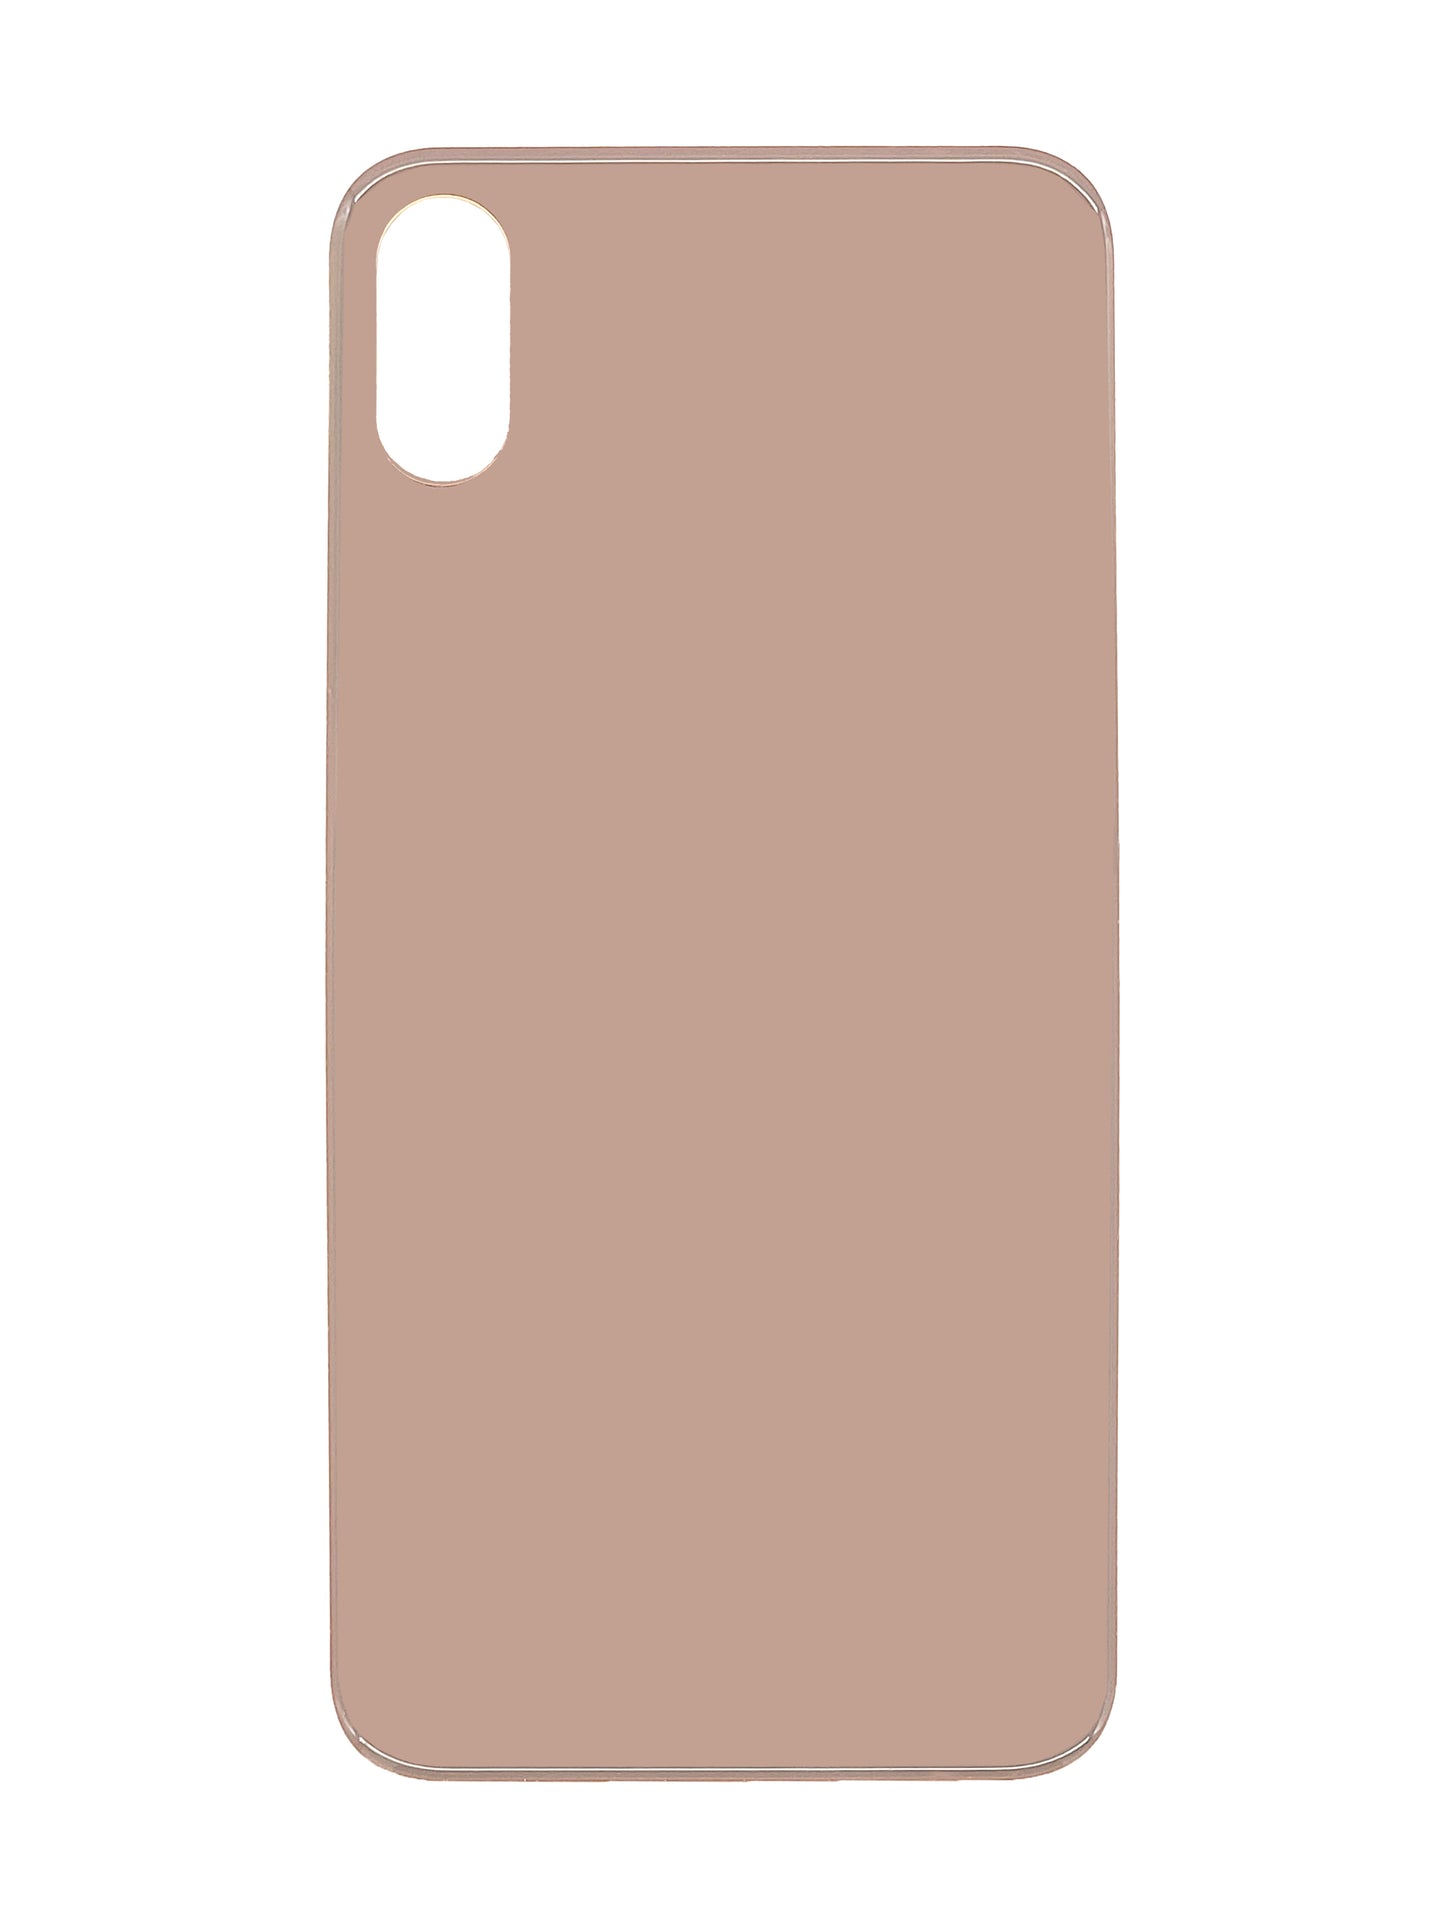 iPhone XS Back Glass (No Logo) (Rose Gold)